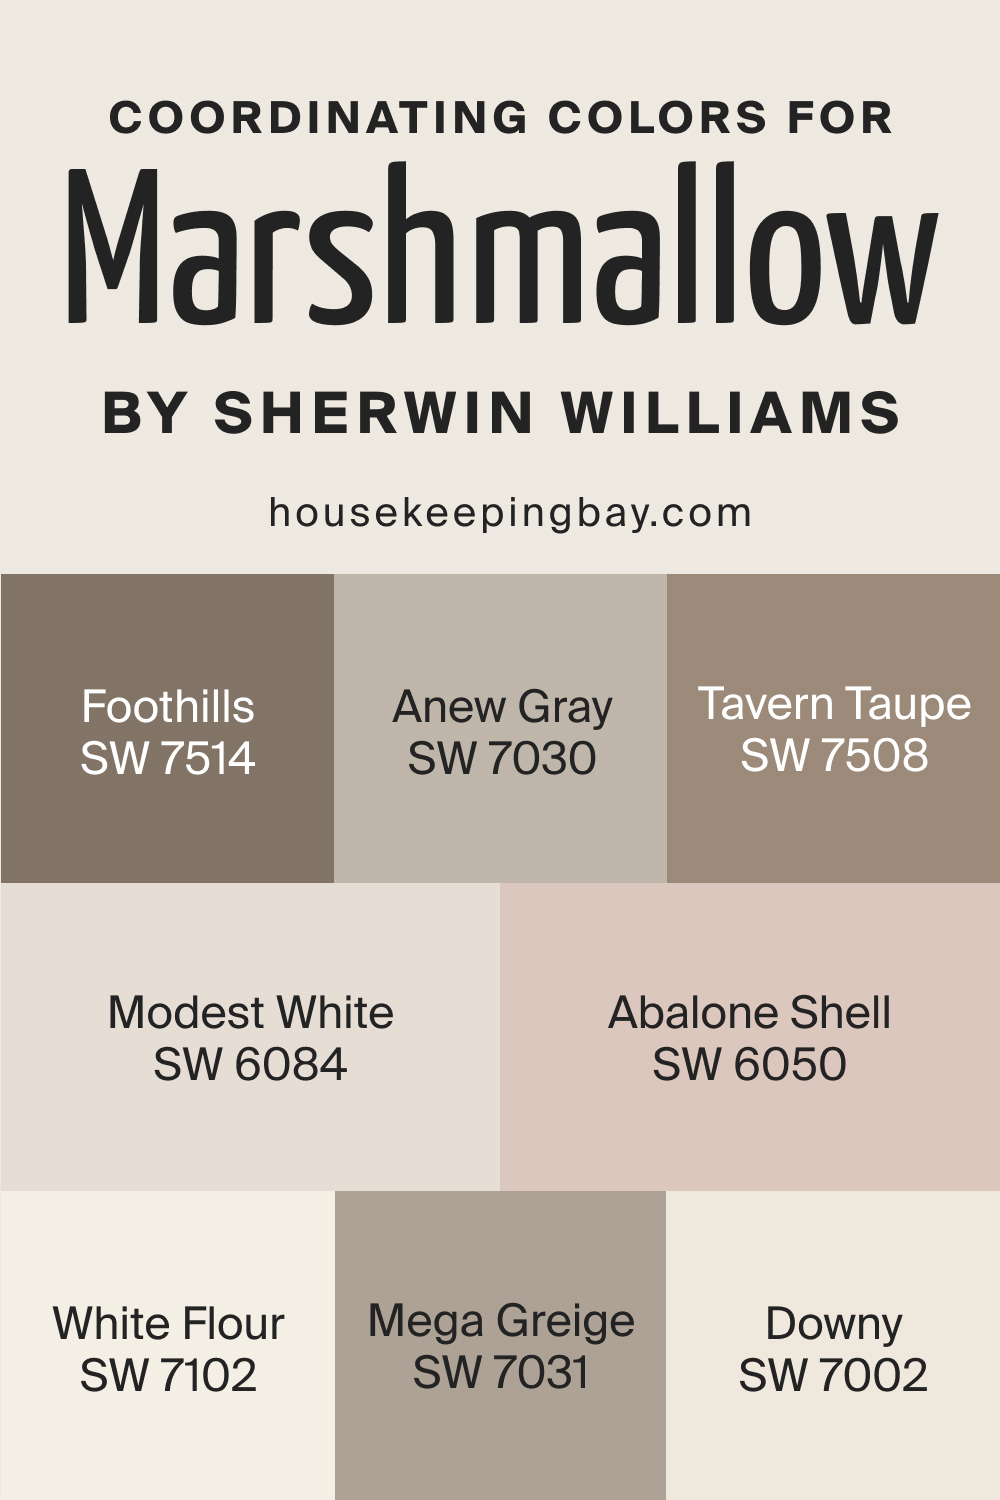 Coordinating Colors for SWMarshmallow by Sherwin Williams